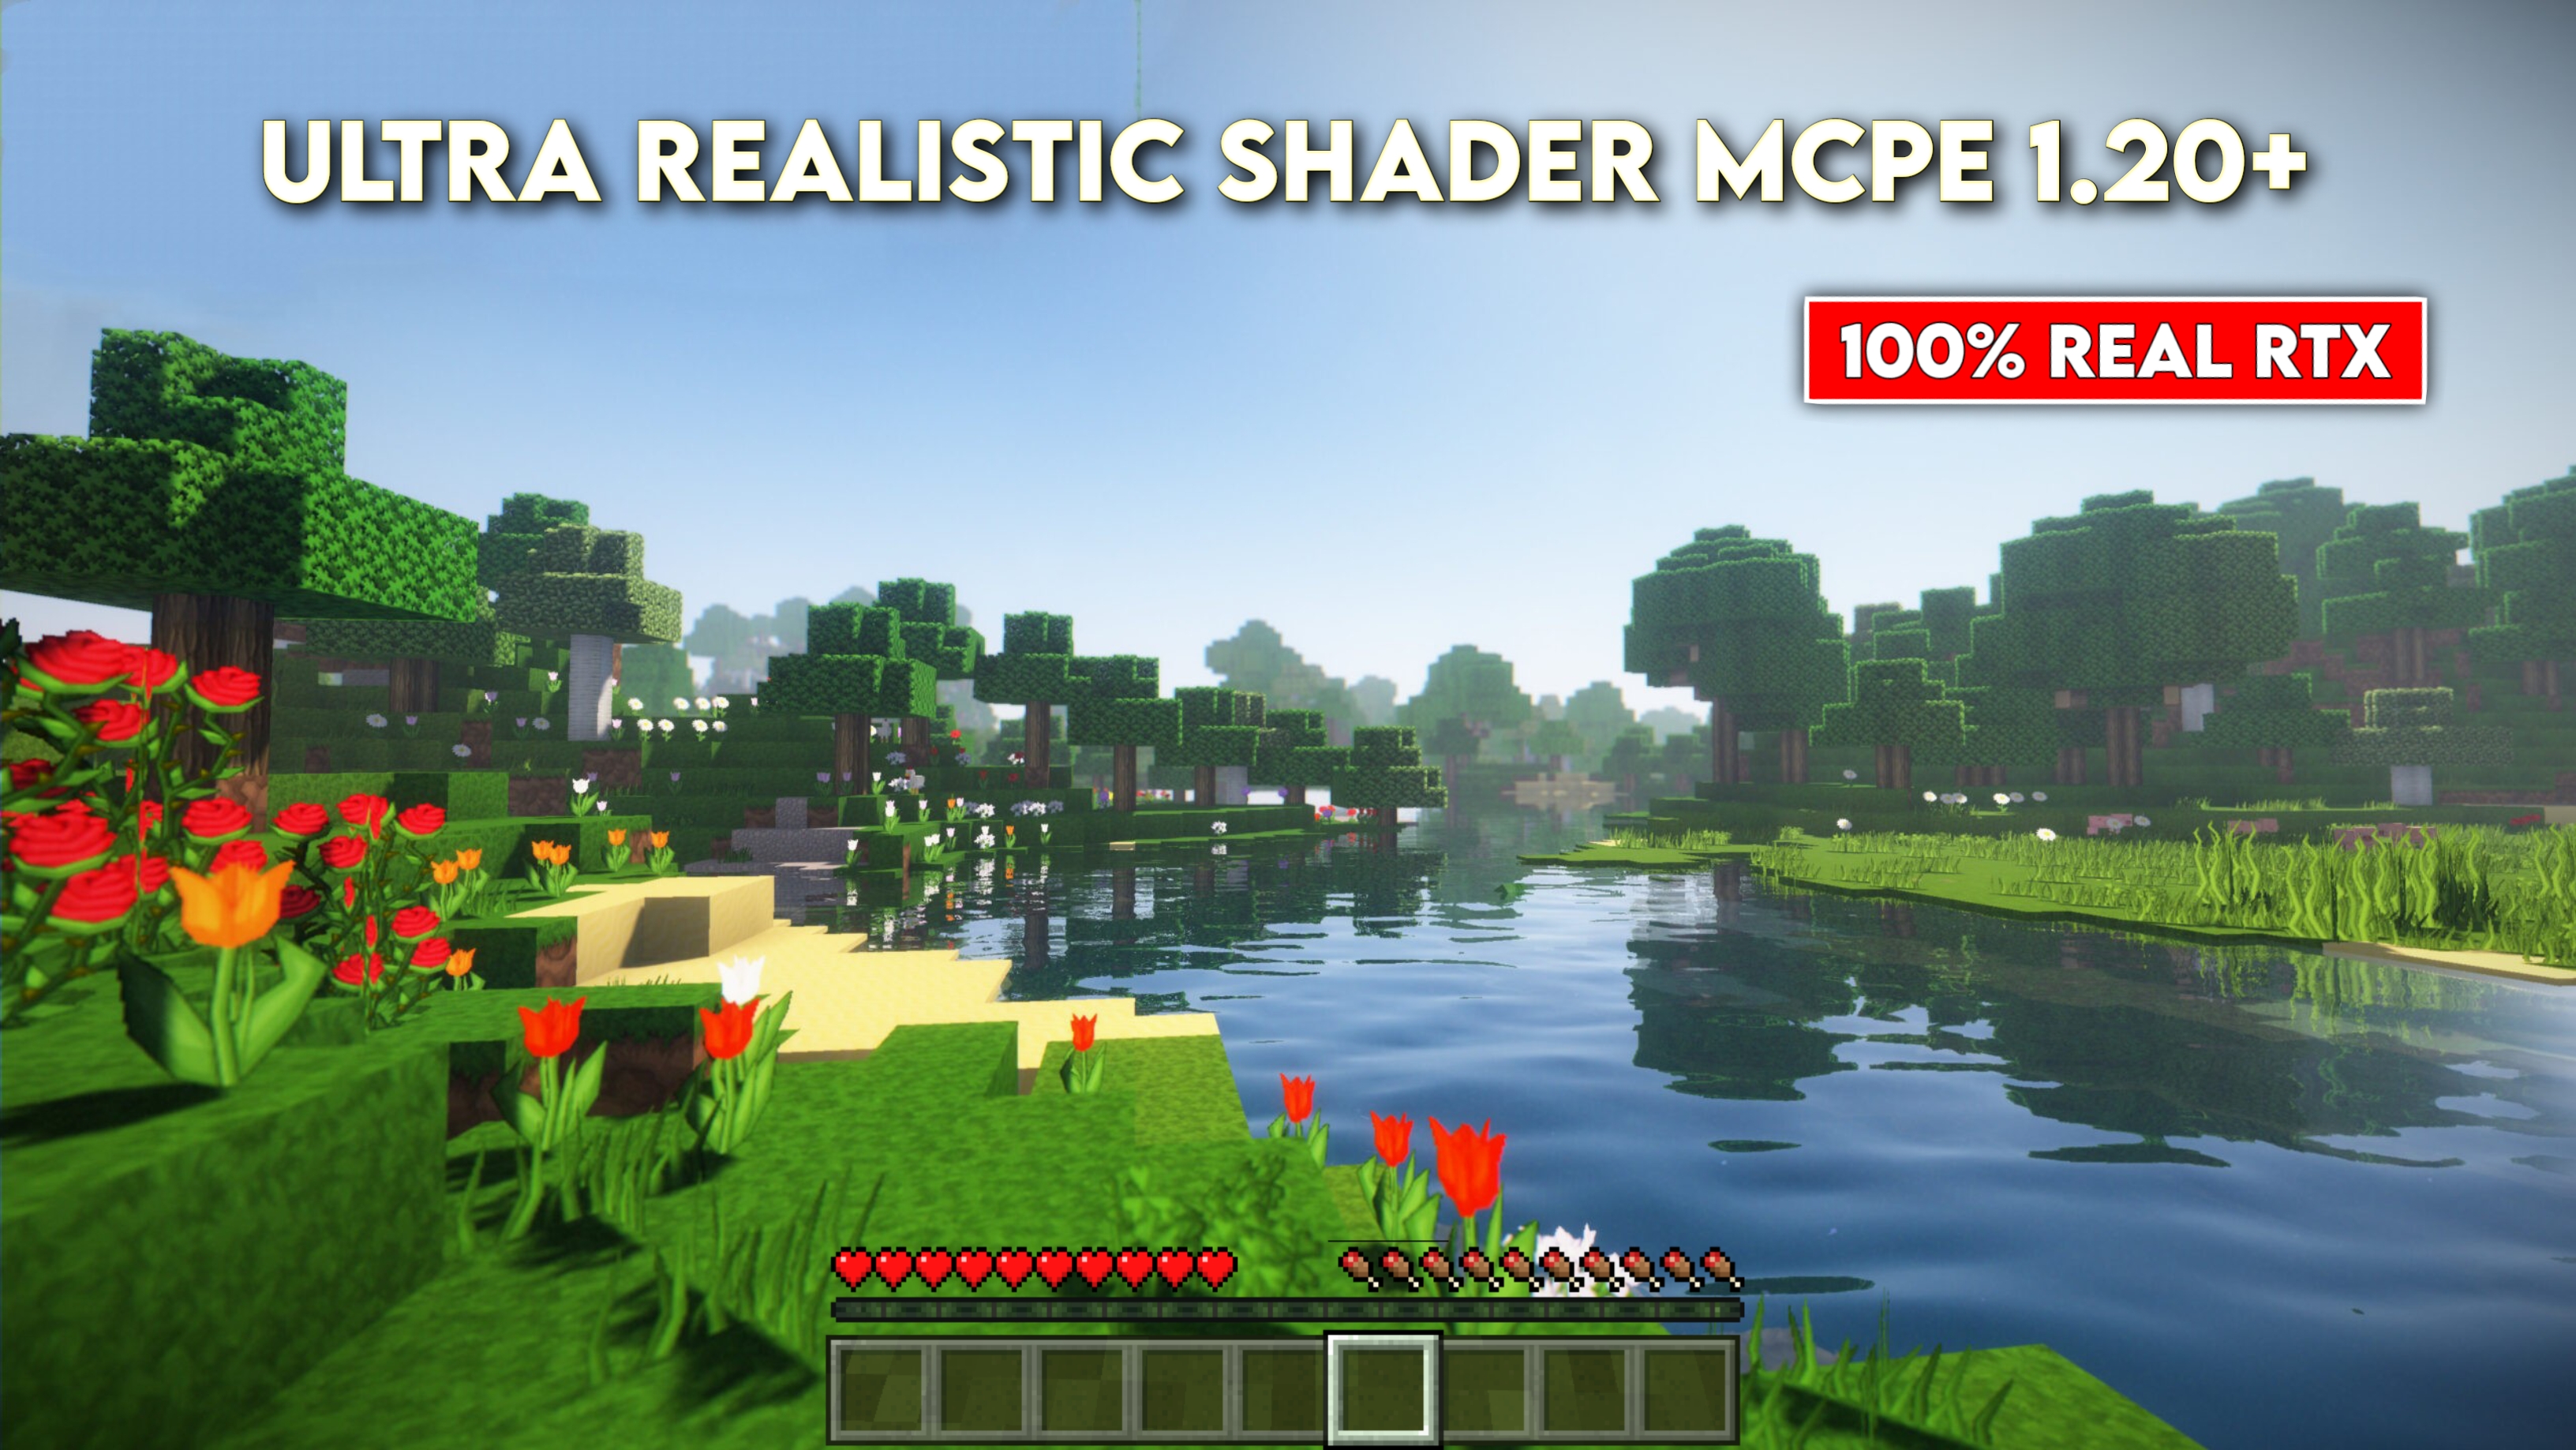 Rtx Shader For Mcpe 1.20.0.20 😍, Render Dragon 1.20+ in 2023